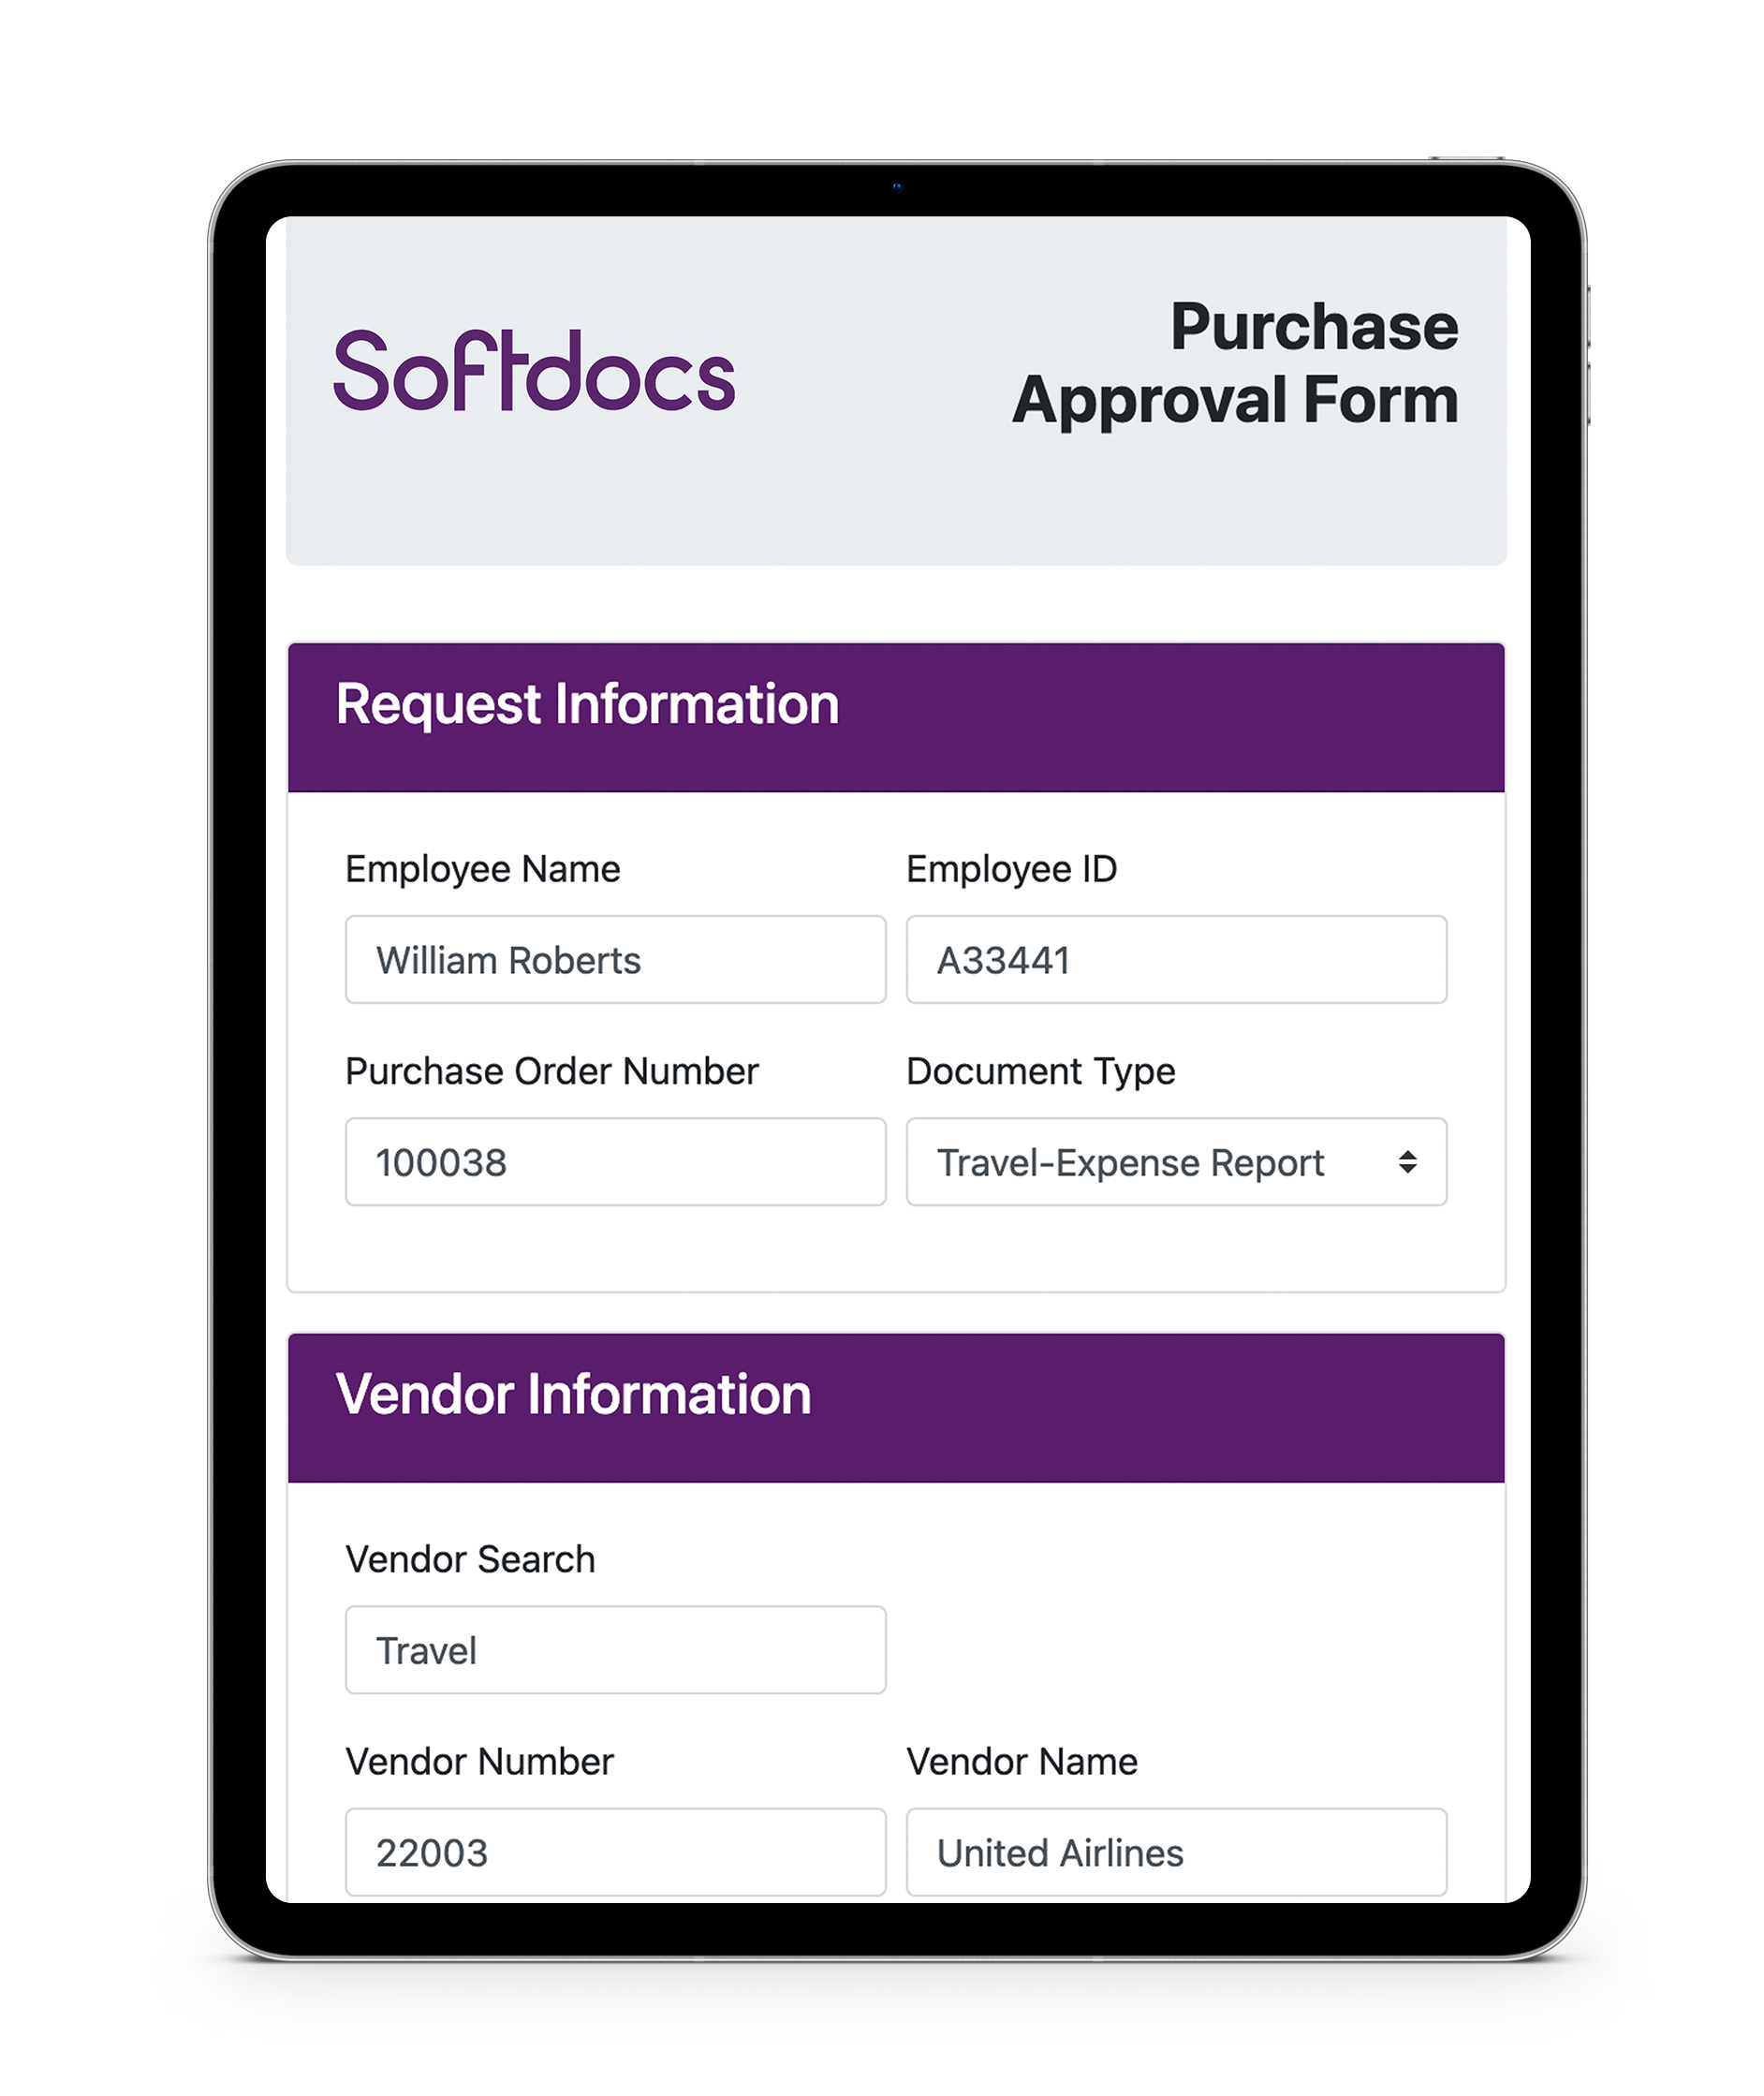 Softdocs eforms purchase approval form on ipad mobile device